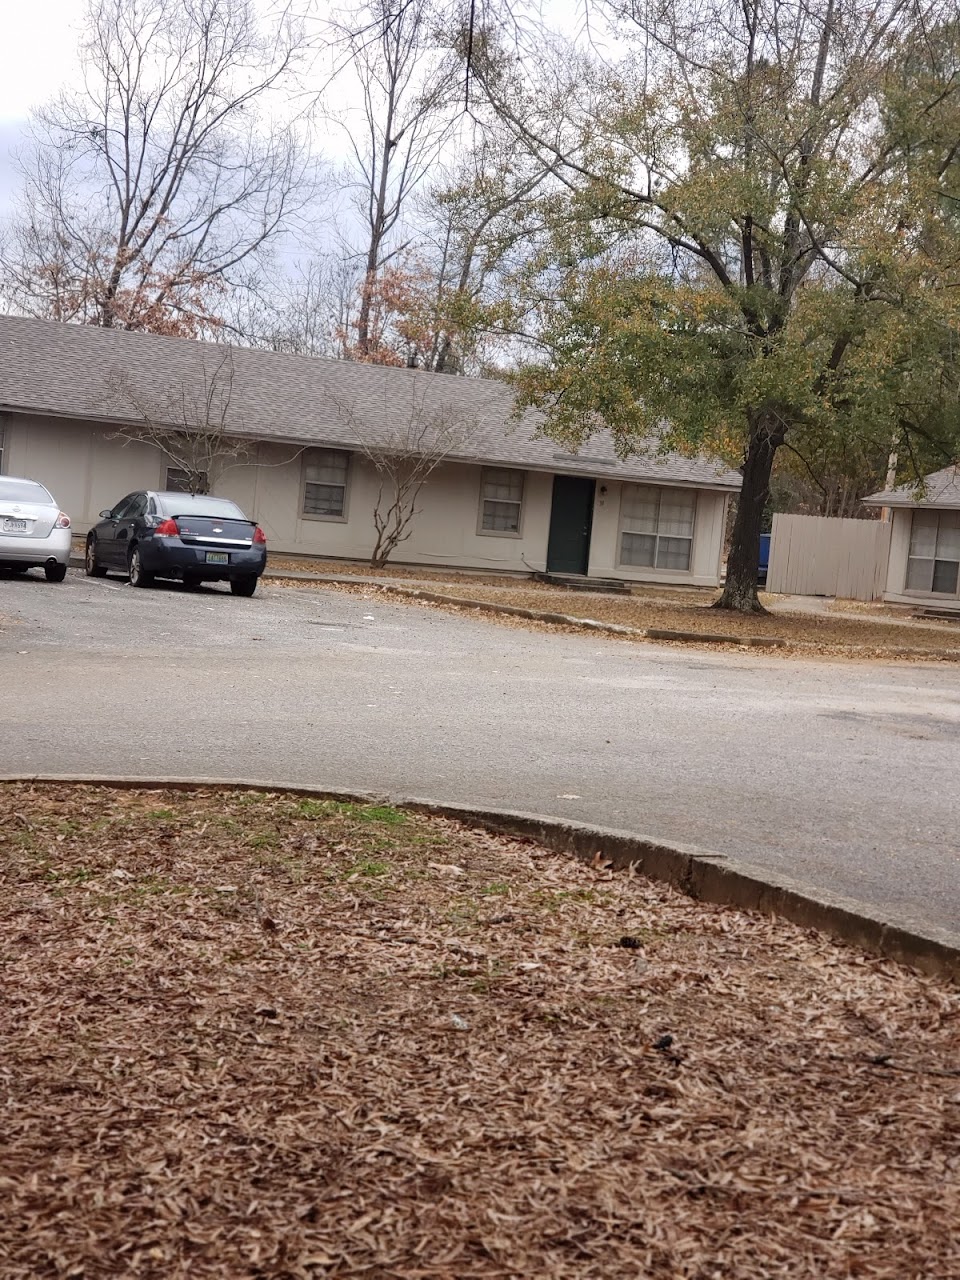 Photo of PEPPER TREE APTS. Affordable housing located at INTERSECTION OF DIVISION AVE & BELVIEW RD BESSEMER, AL 